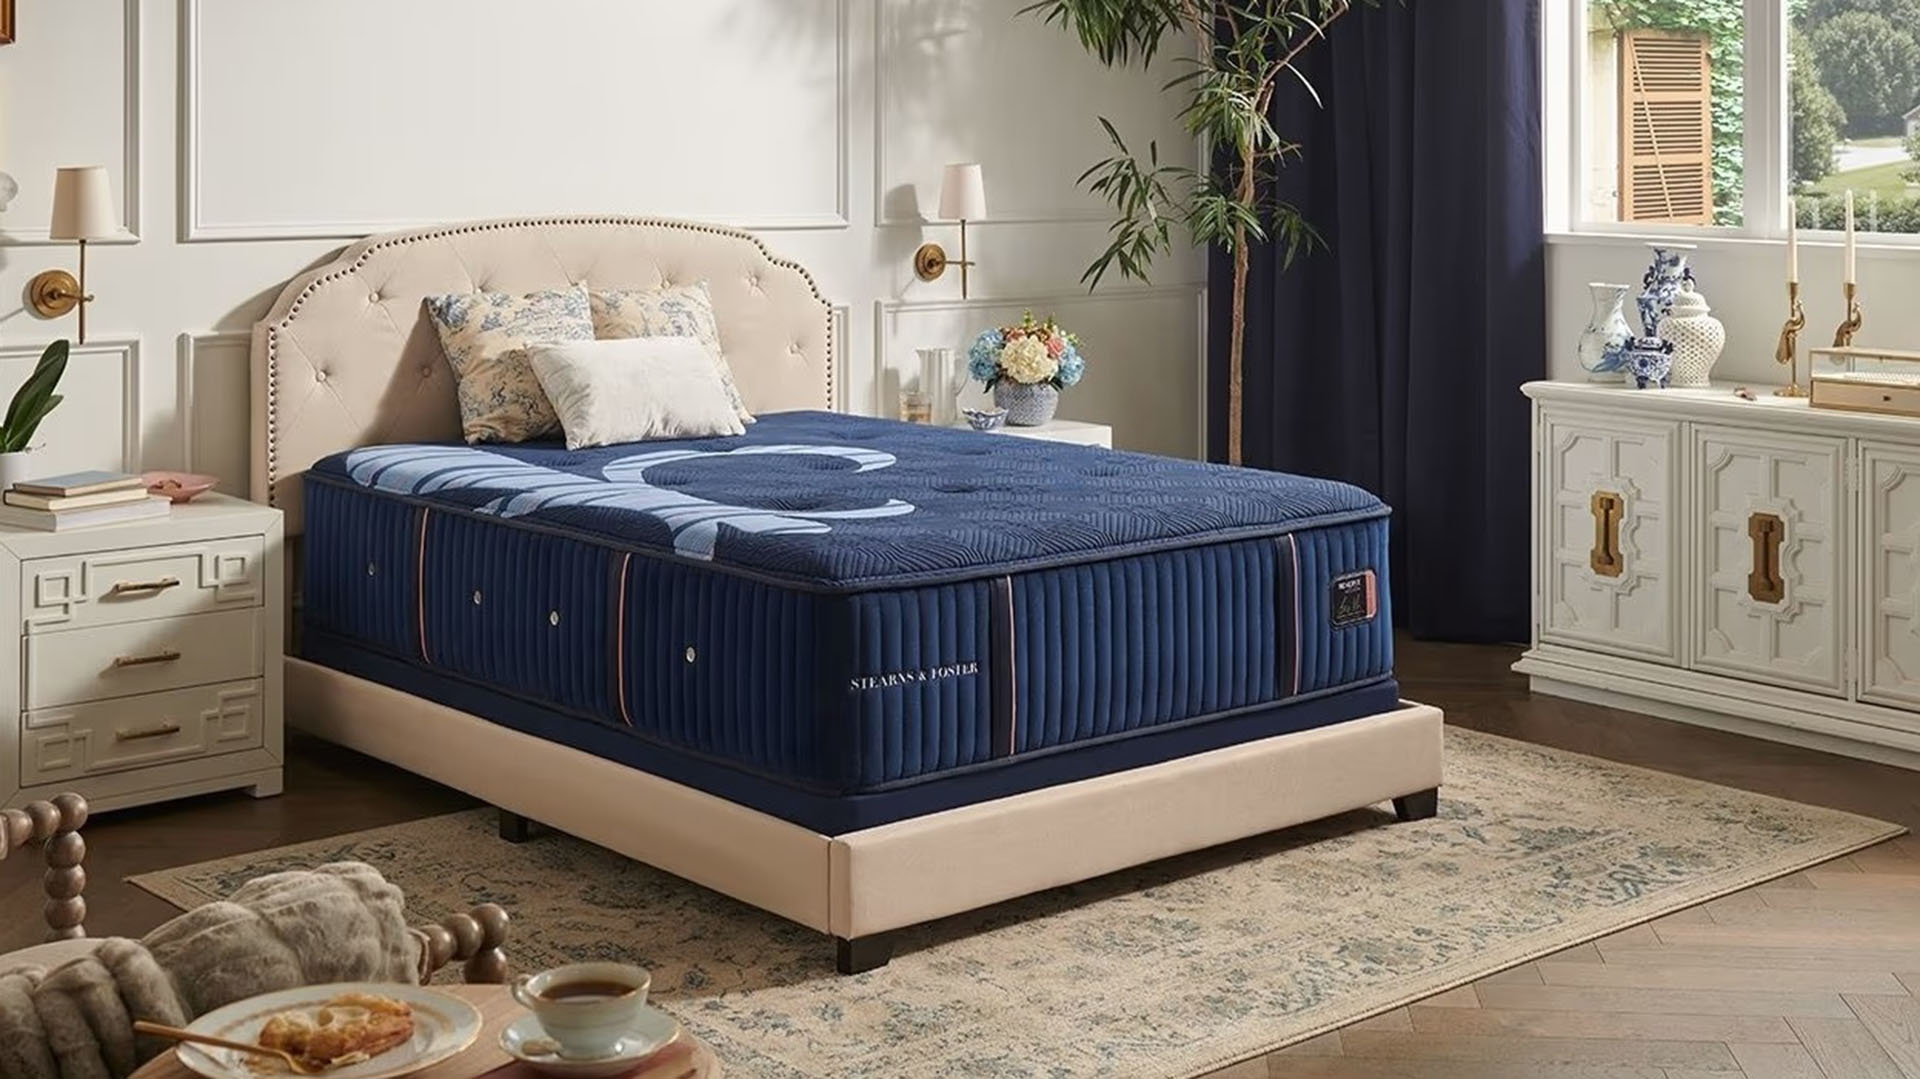 Stearns & Foster mattresses in Allen are designed with comfort and support in mind.